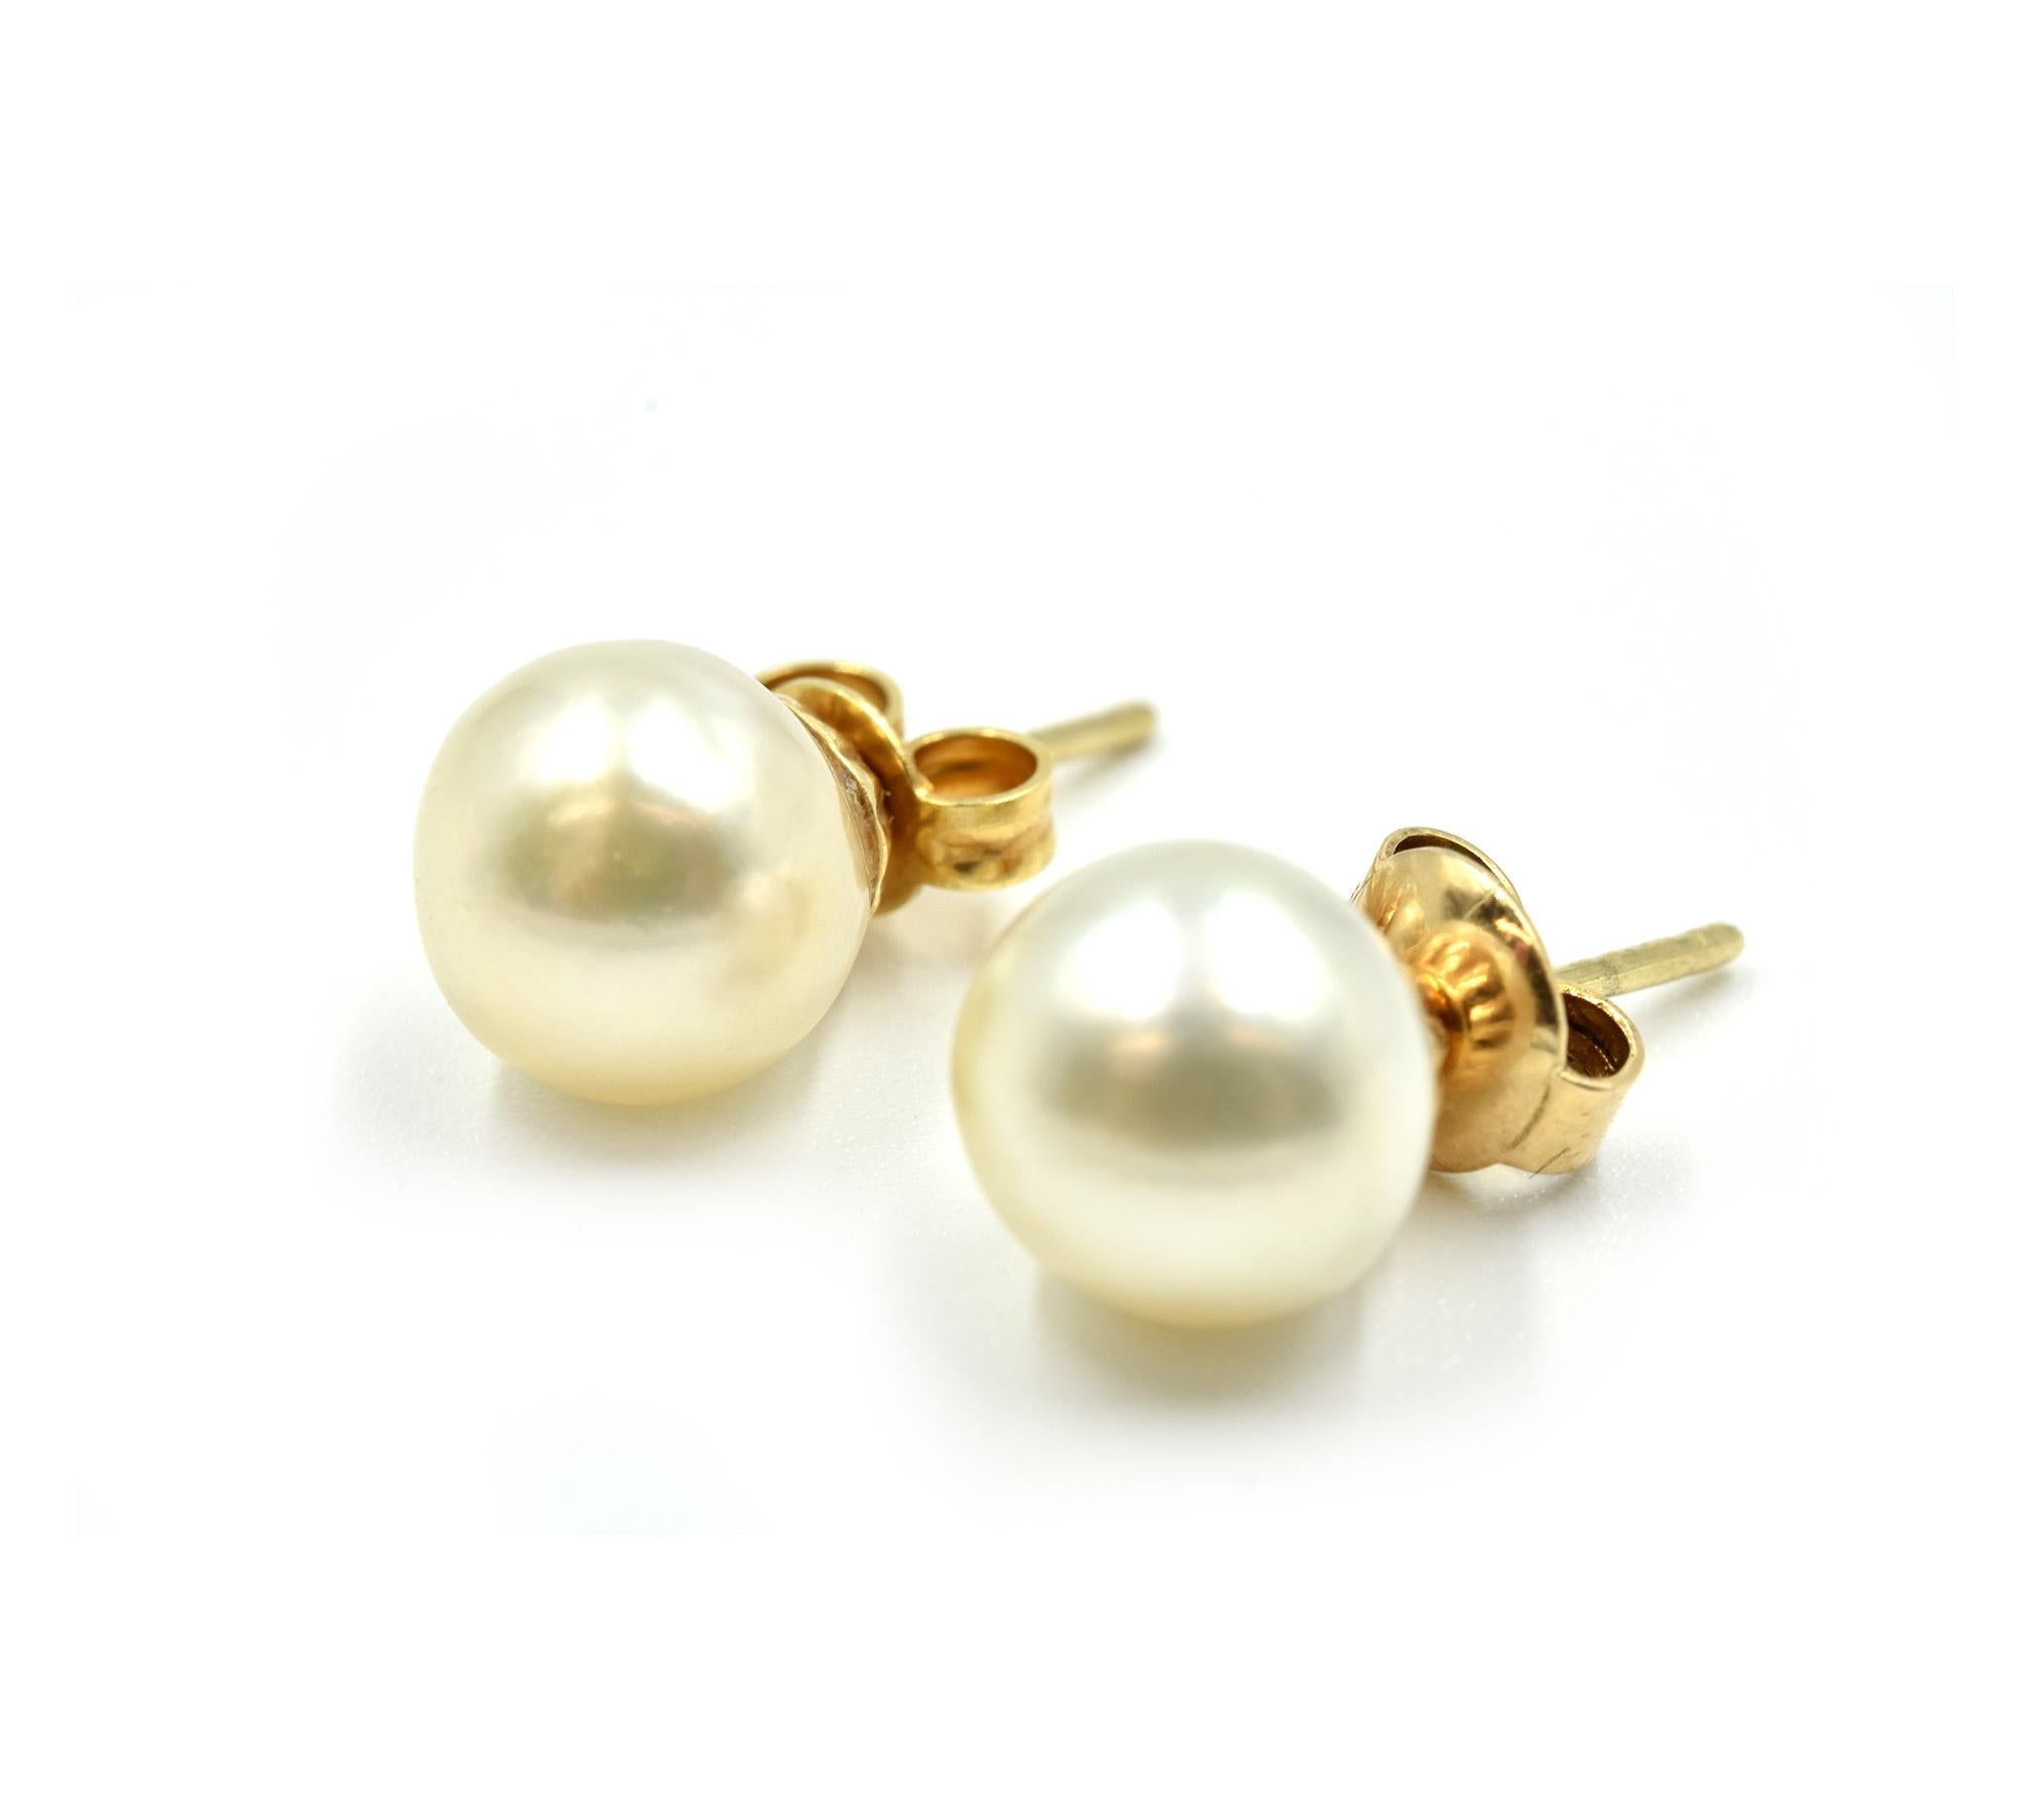 Designer: custom design
Material: 14k yellow gold
Pearls: two round 8mm cultured pearls
Fastenings: friction backs
Weight: 2.30 grams
